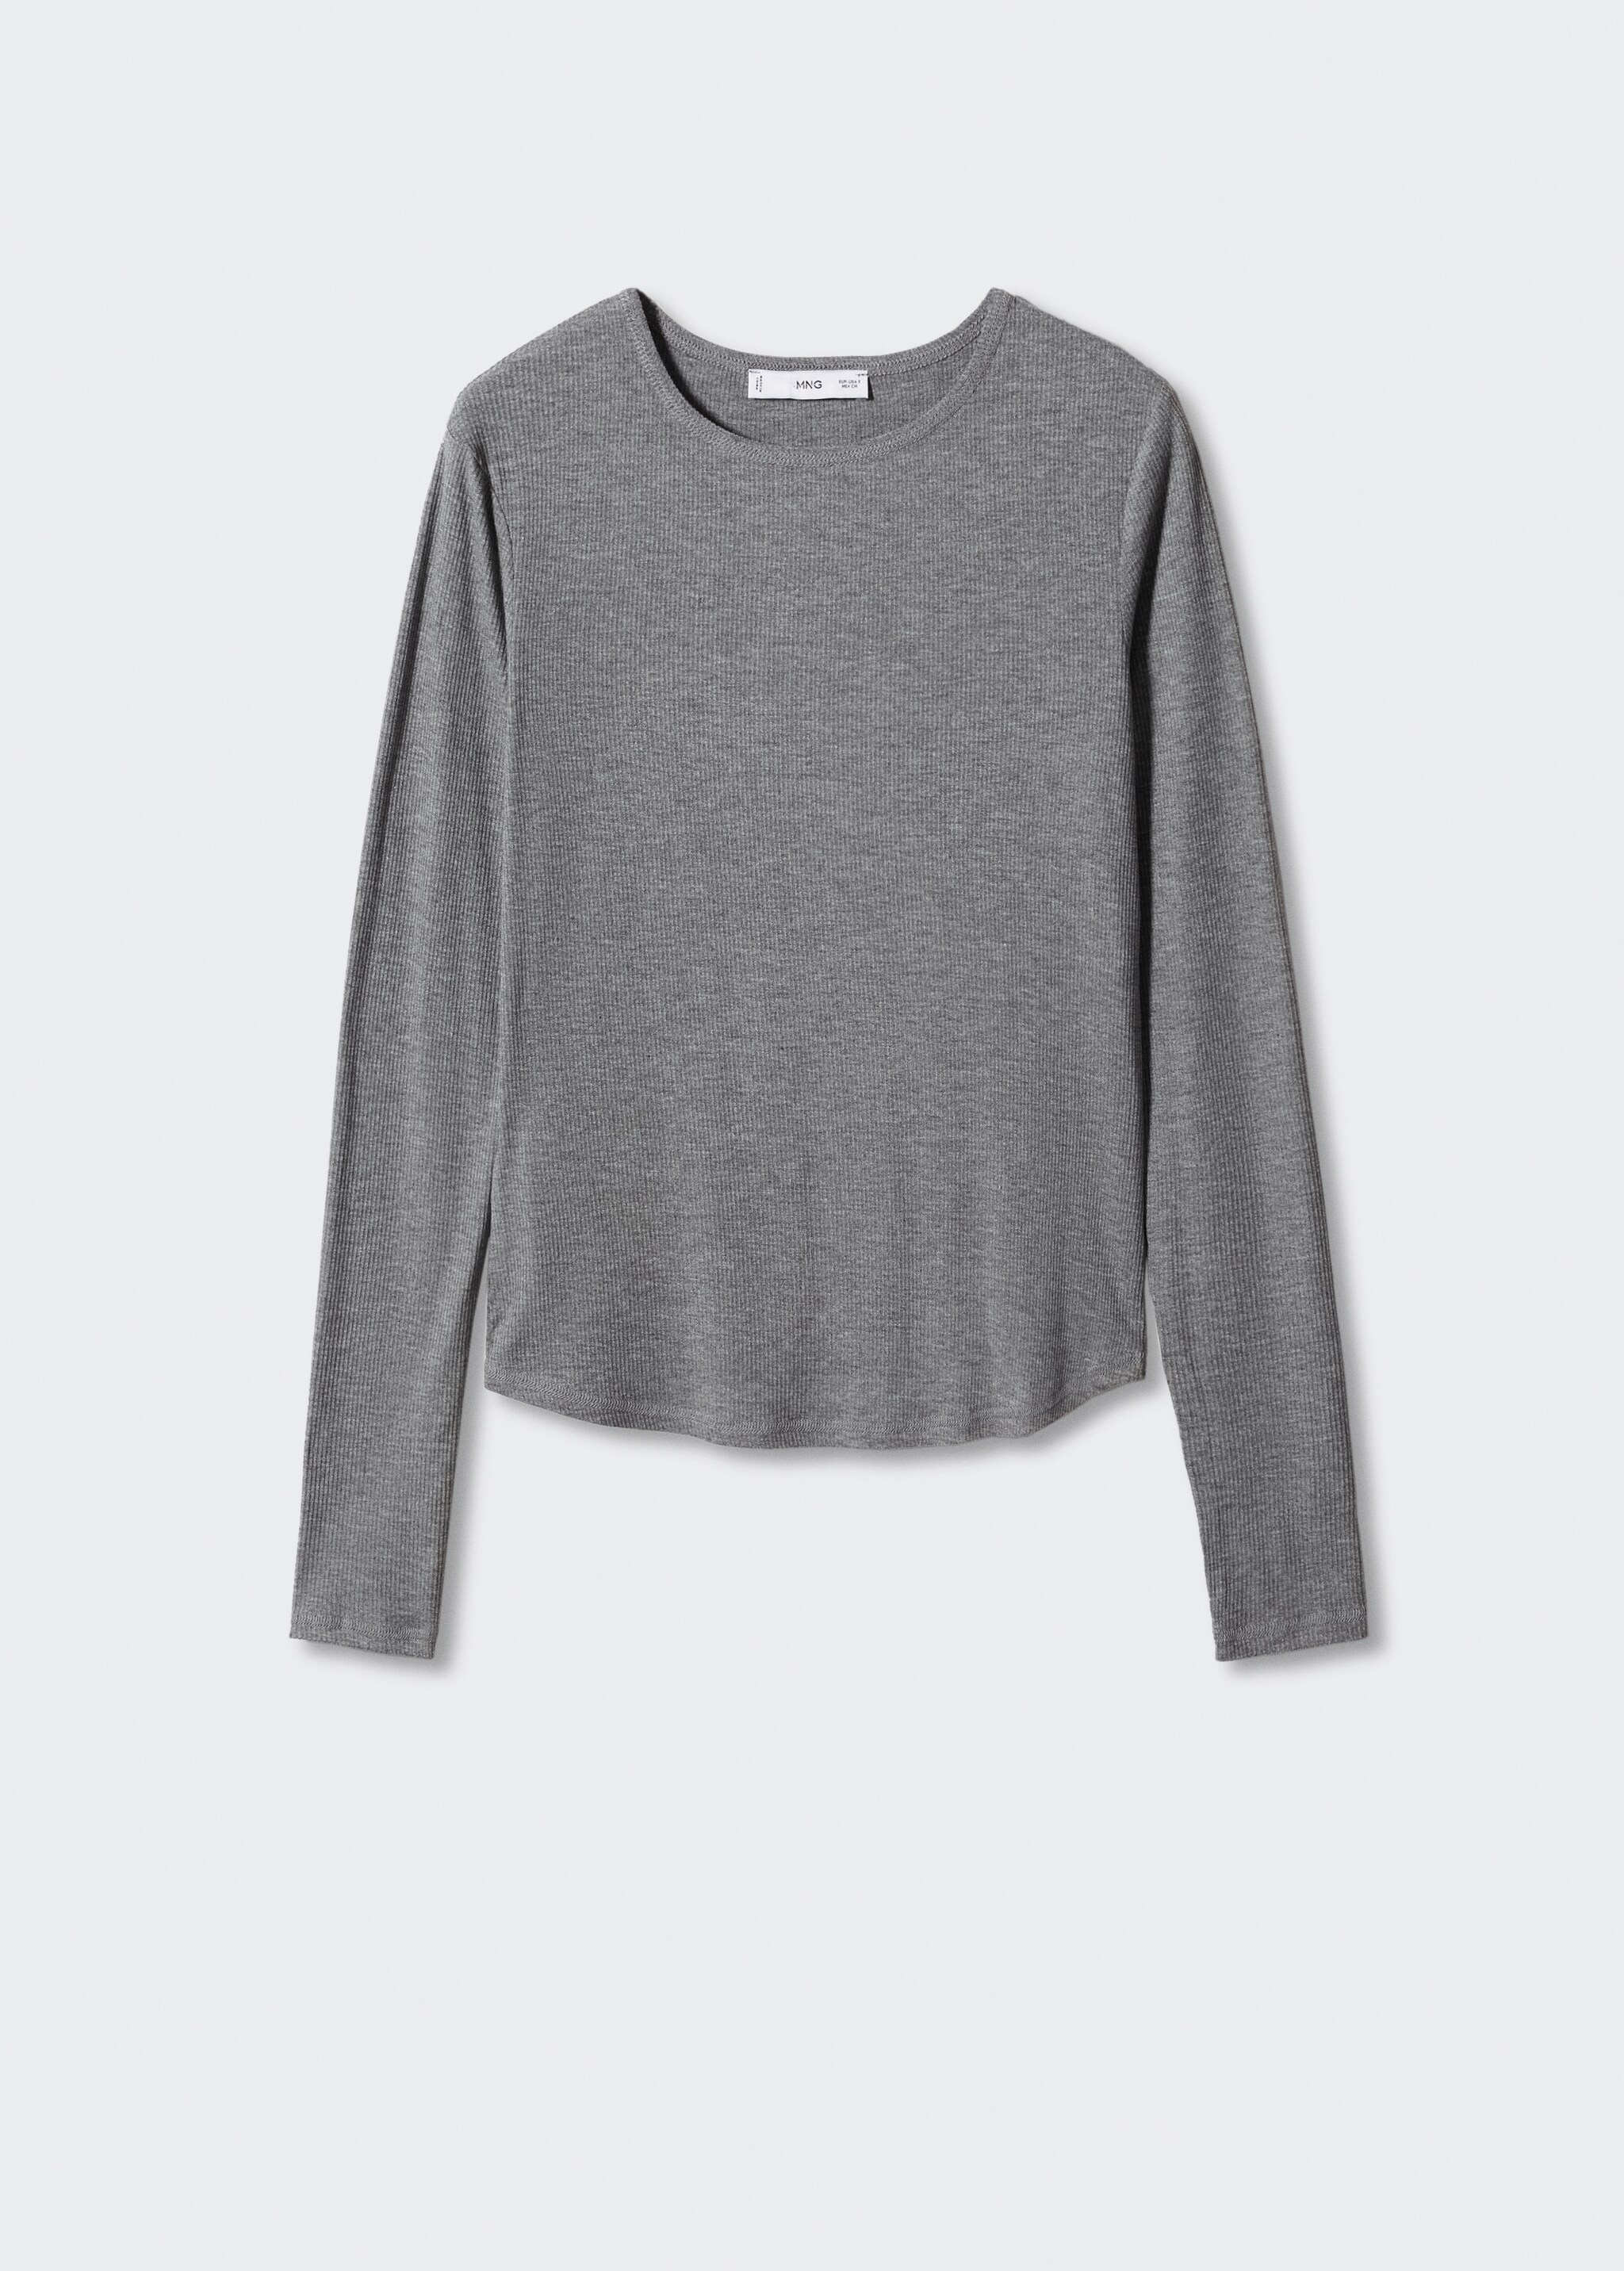 Ribbed long-sleeved t-shirt - Article without model